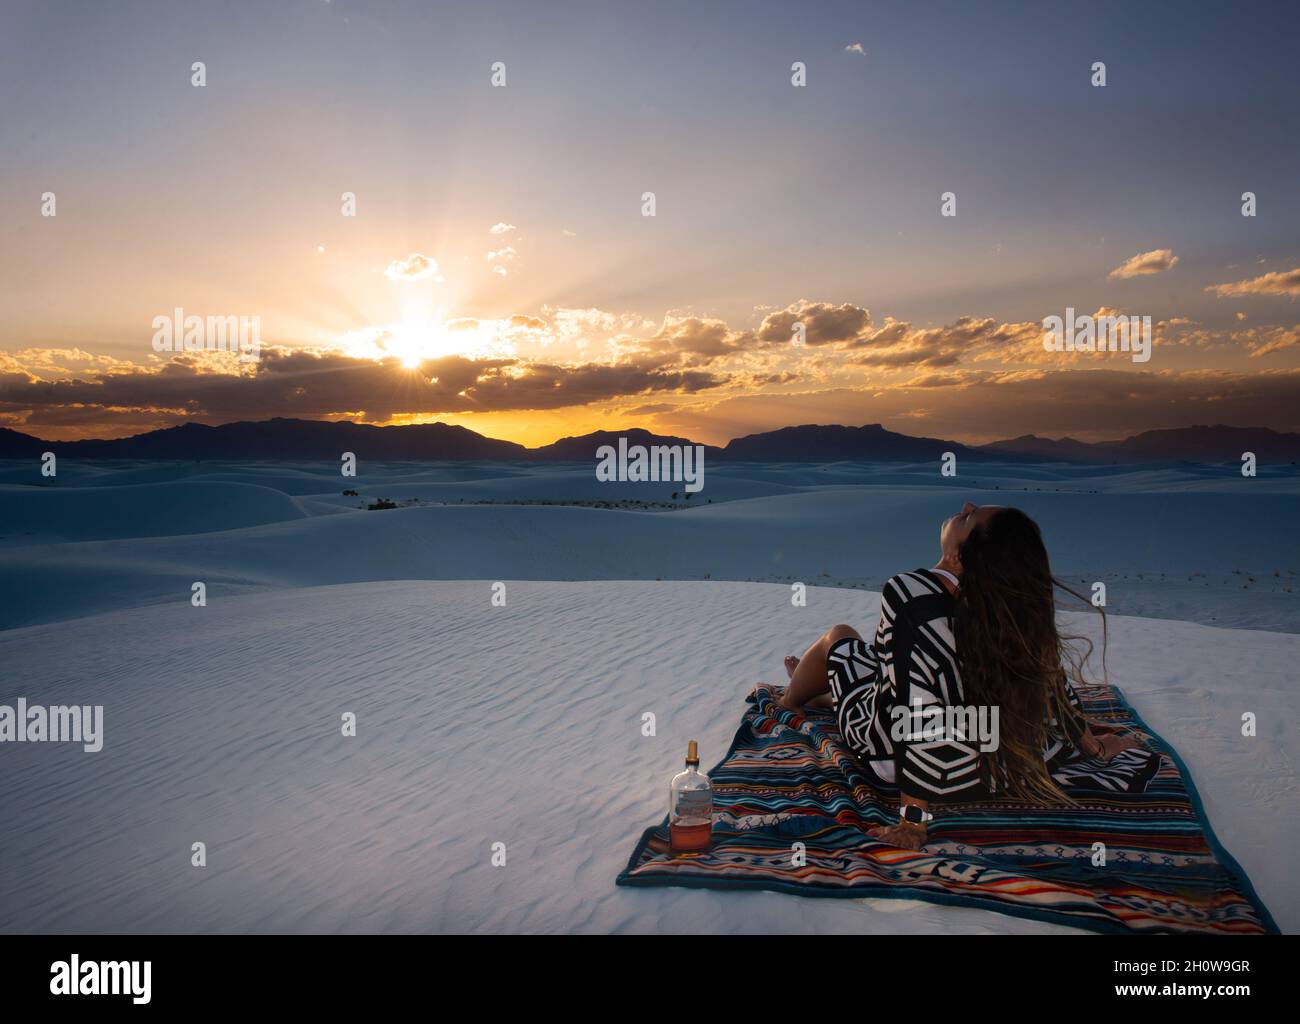 Bohemian Girl Relaxing At Sunset In White Sands, New Mexico Stock Photo